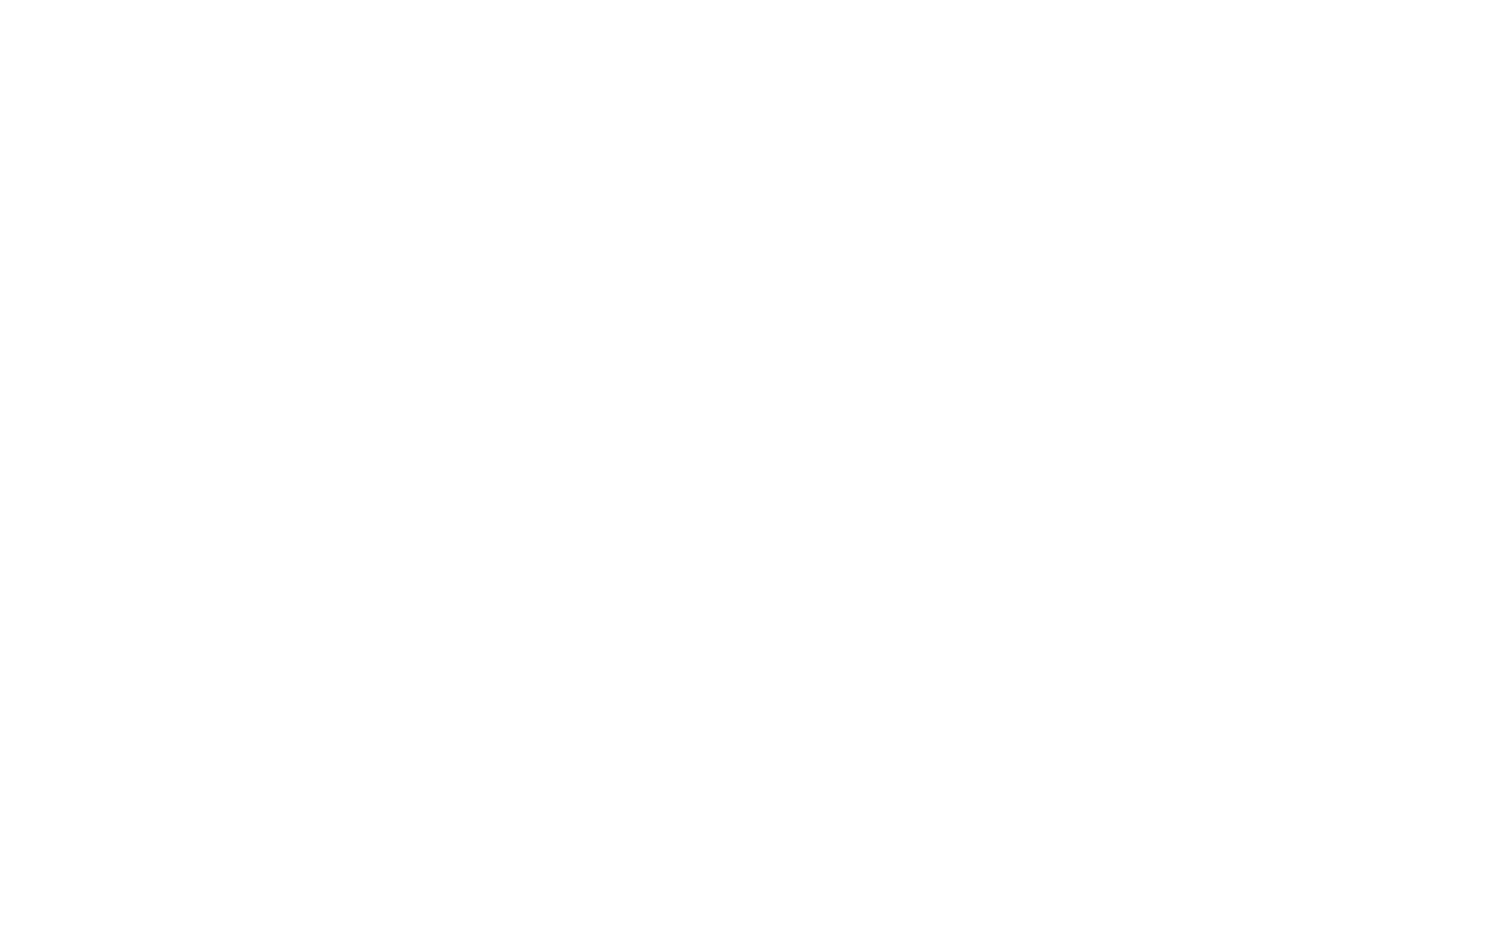 Nutty Norsky Baking Co.